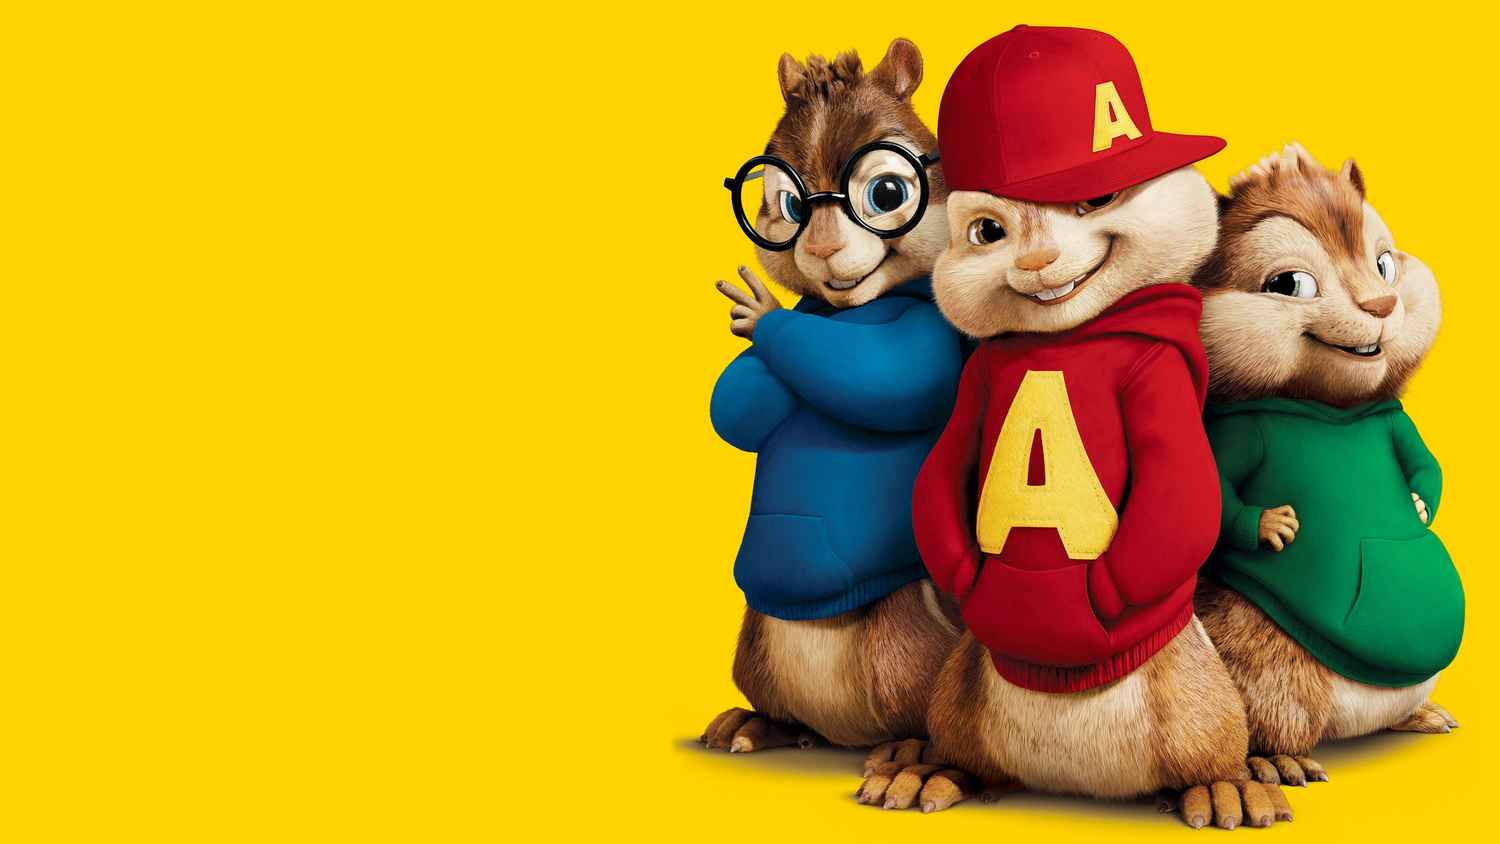 alvin and the chipmunks the squeakquel full movie free